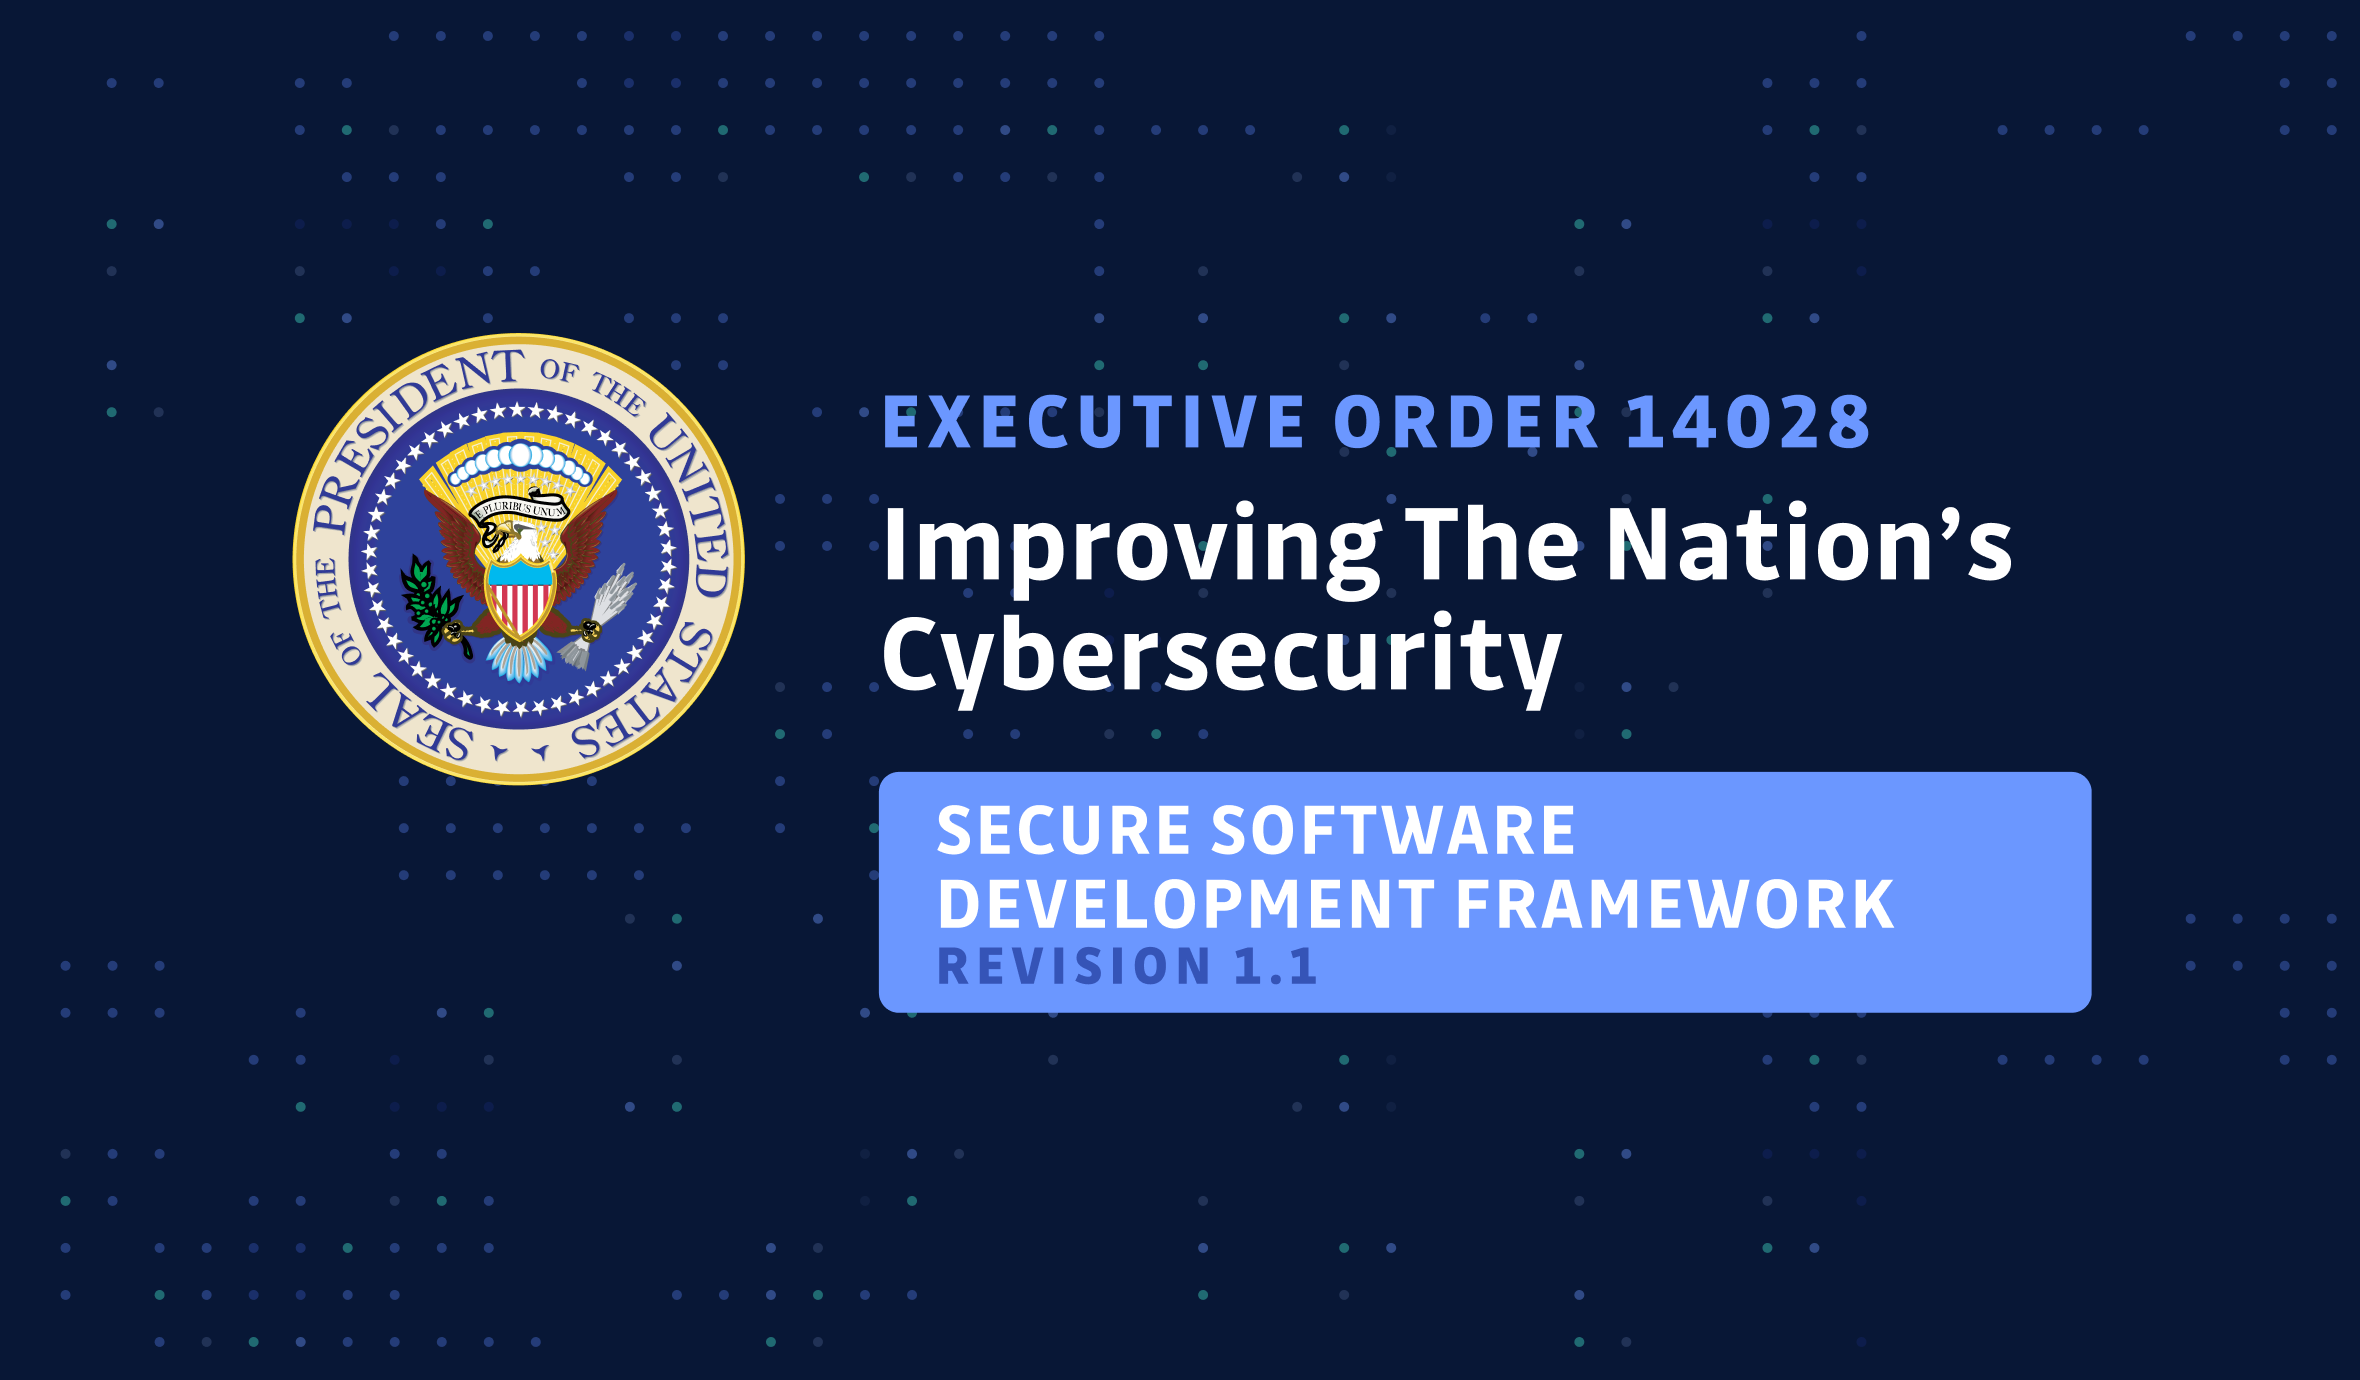 Key Highlights From the New NIST SSDF